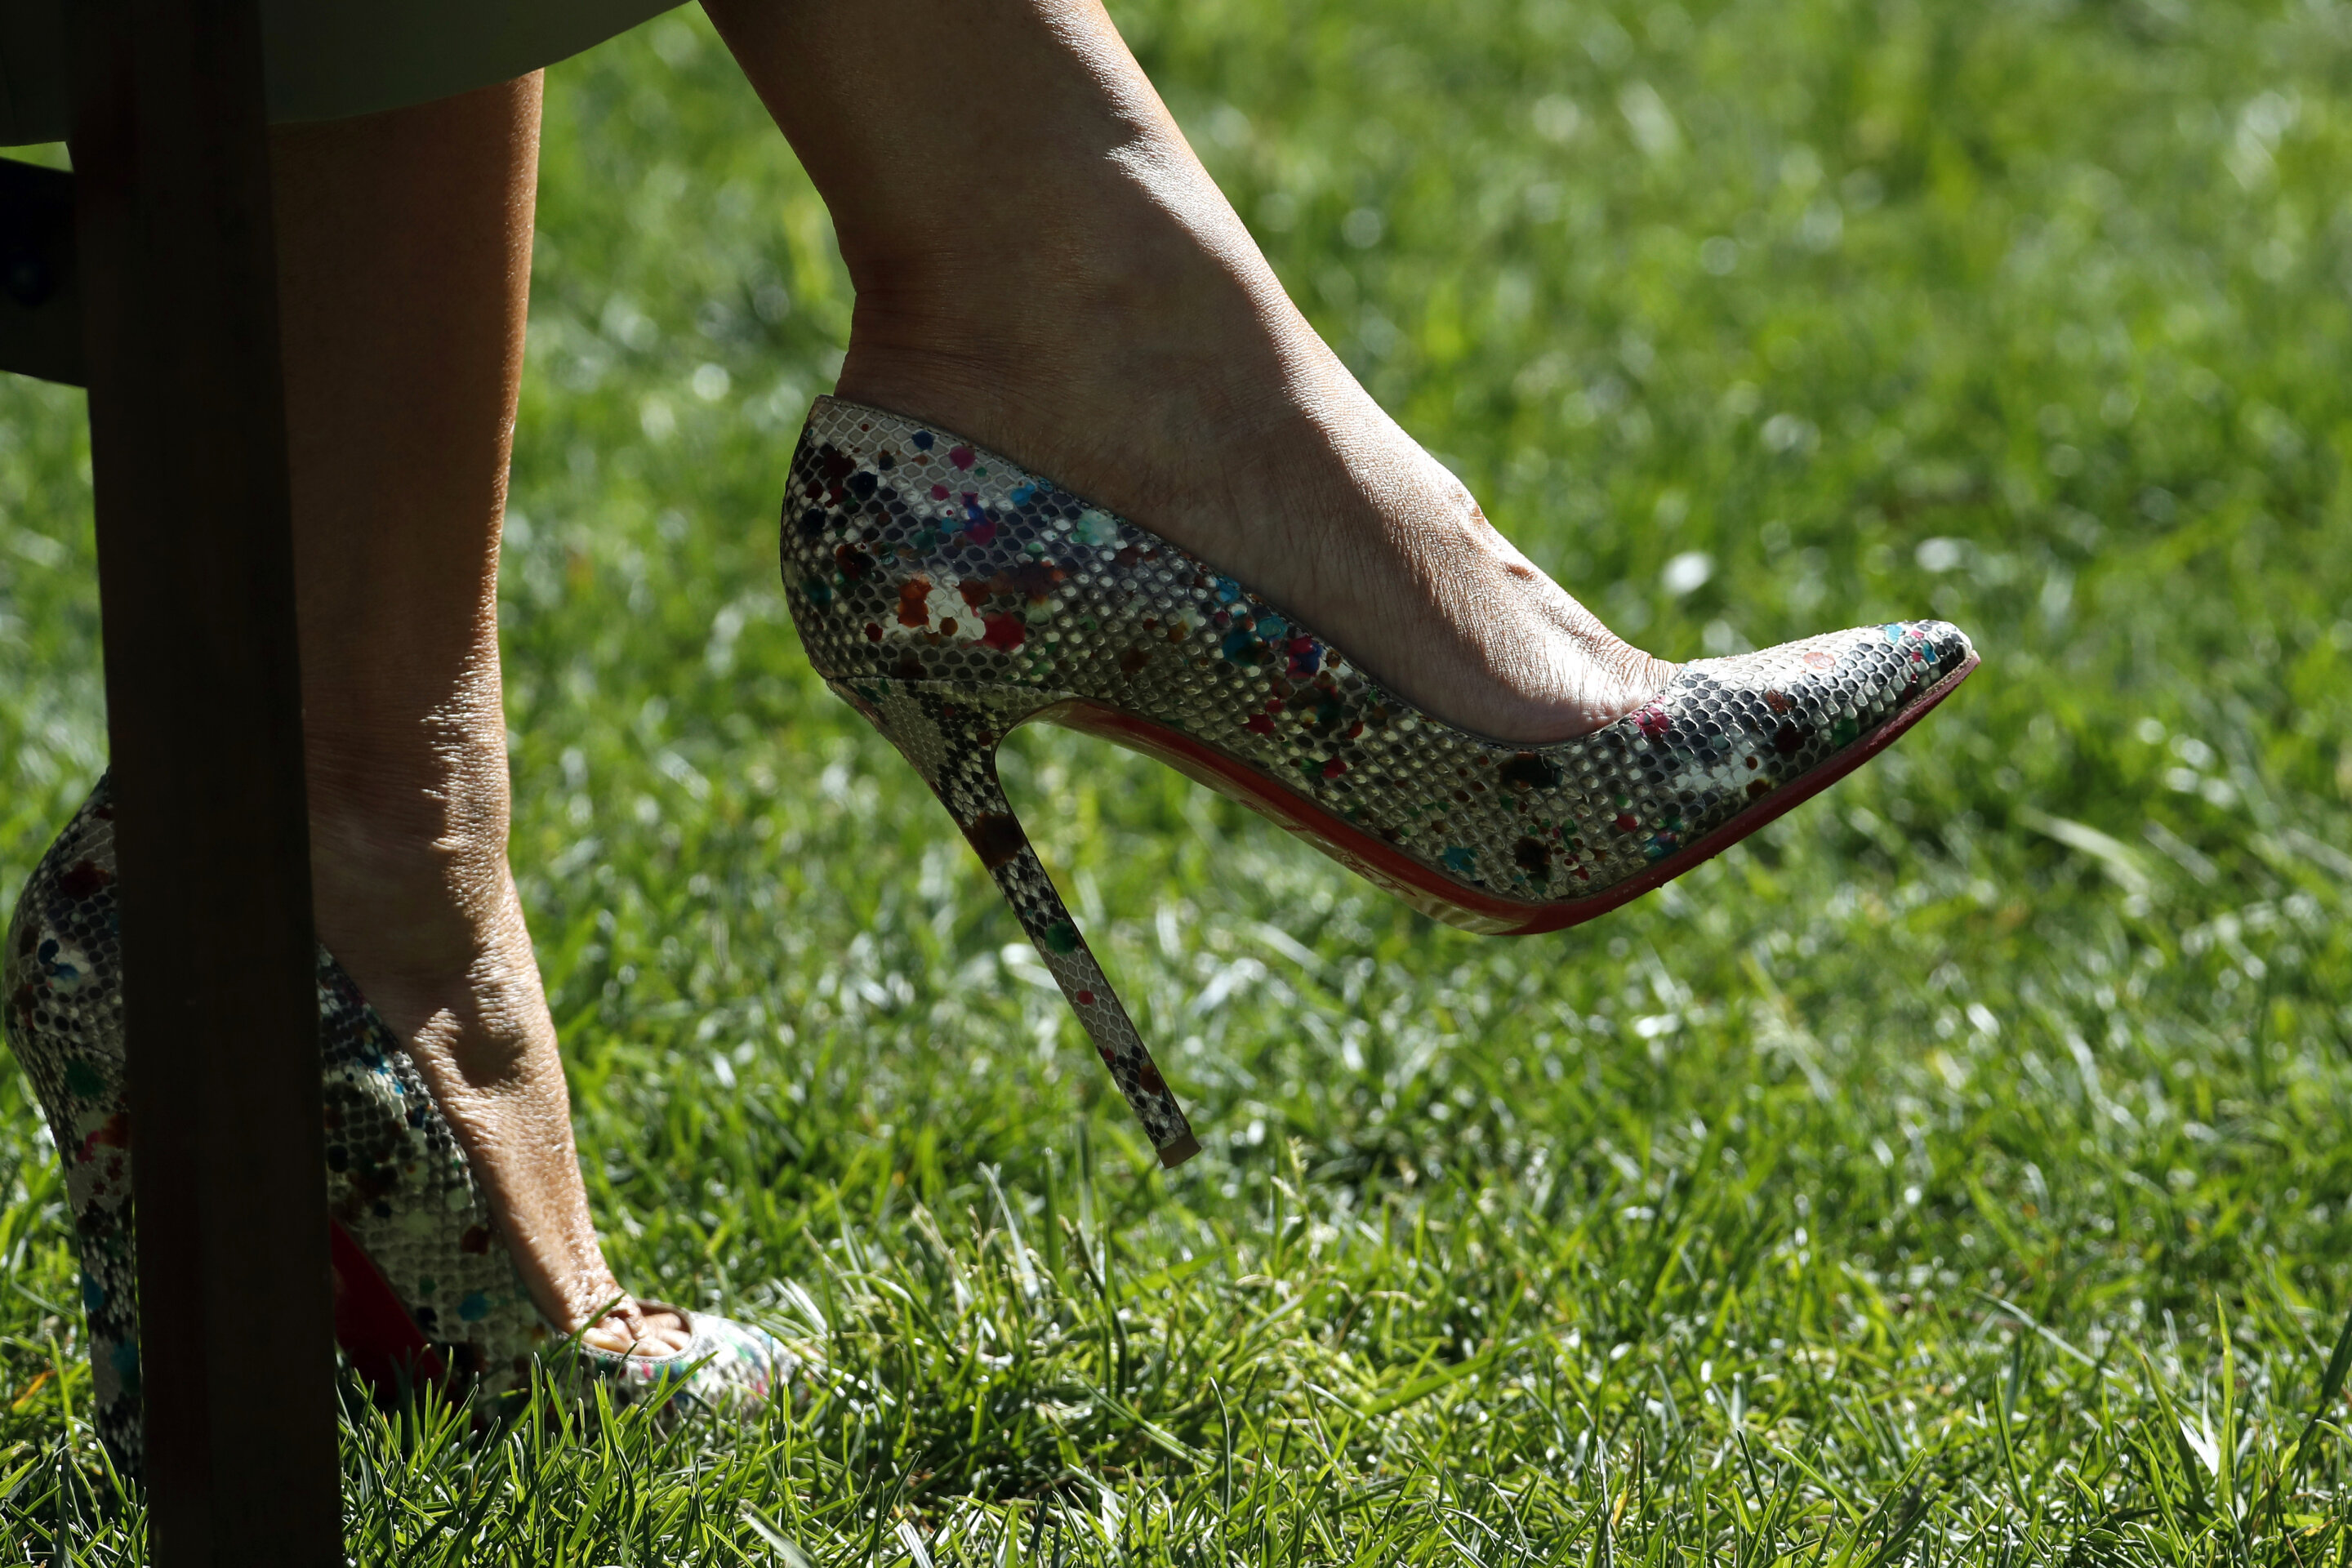 Red soles on high heels: Fashion designer Christian Louboutin wins  trademark case